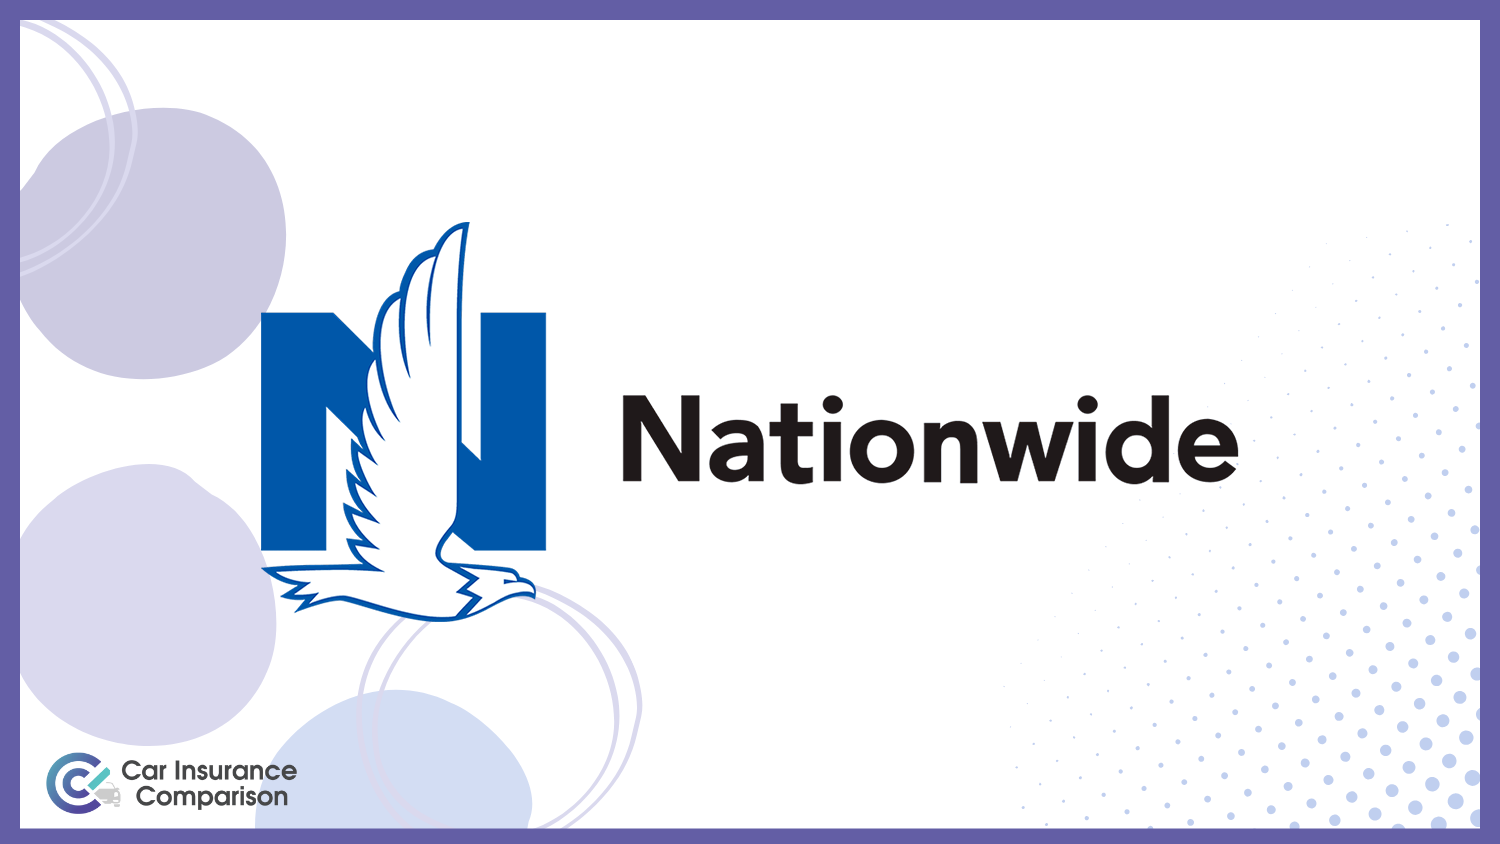 Nationwide: Cheap Insurance for 2-Door Cars